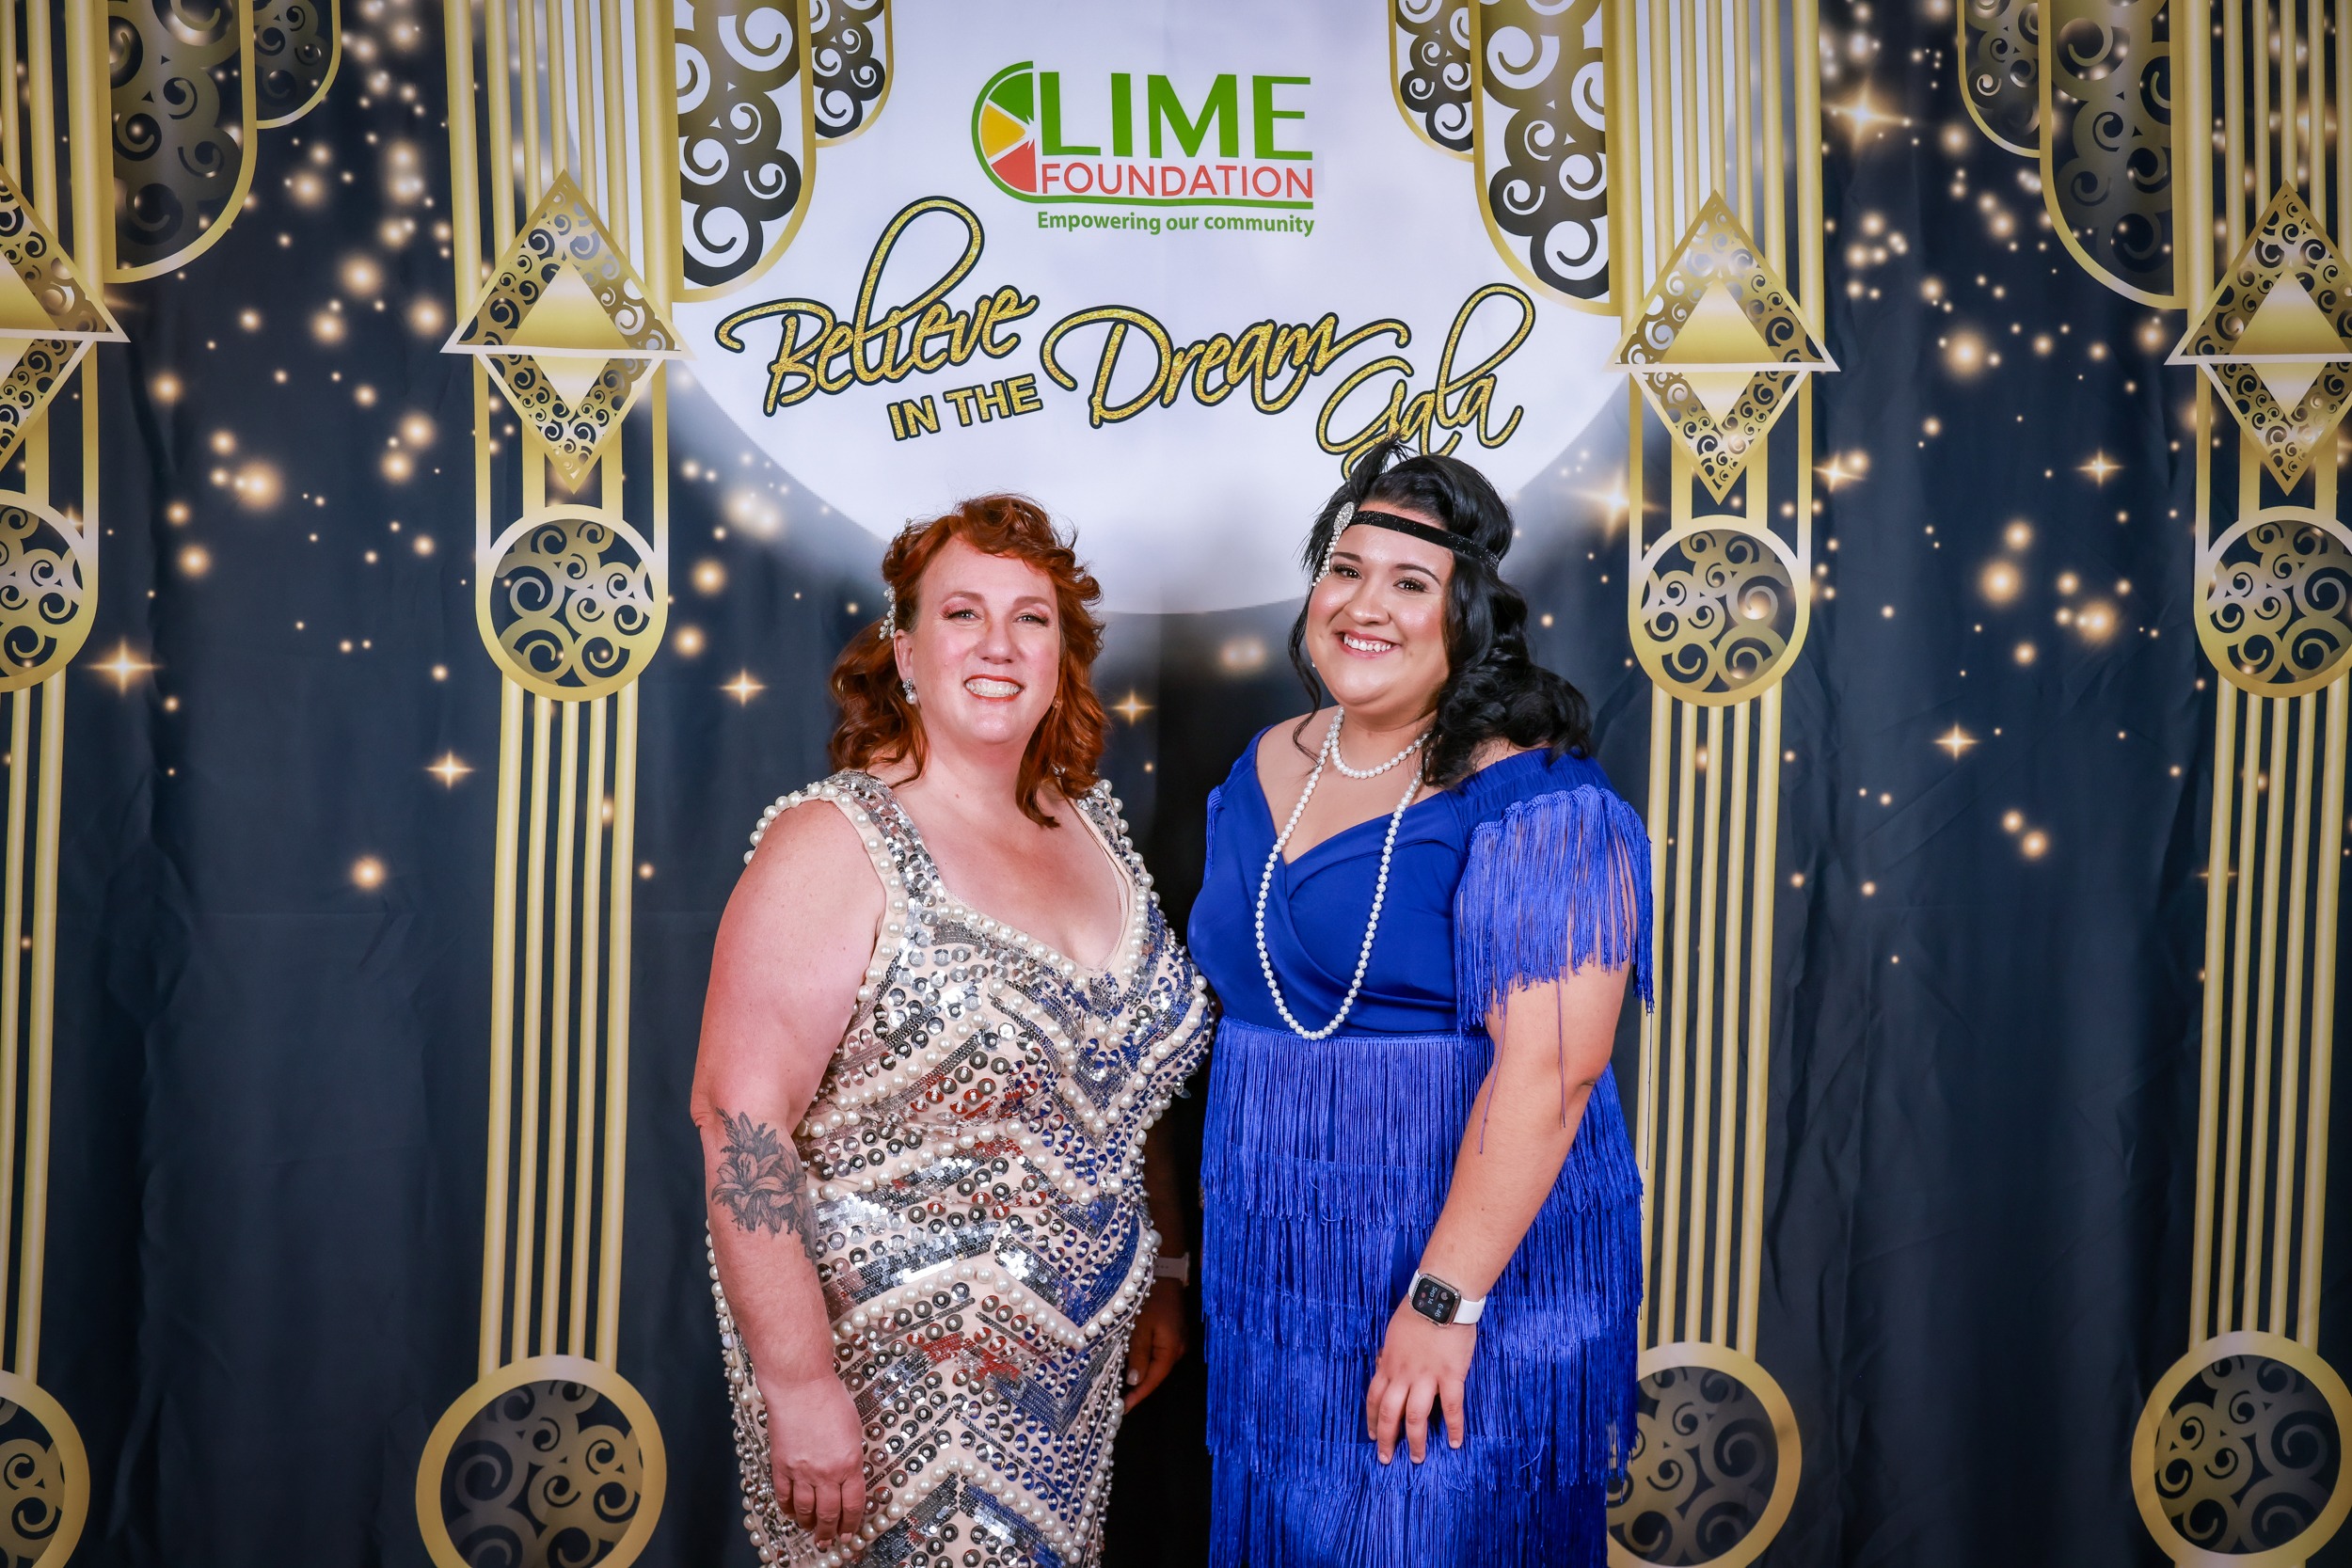 Two women posing for a photo at a 1920's themed party hosted by The LIME Foundation of Santa Rosa, a Sonoma County Non-Profit Organization.